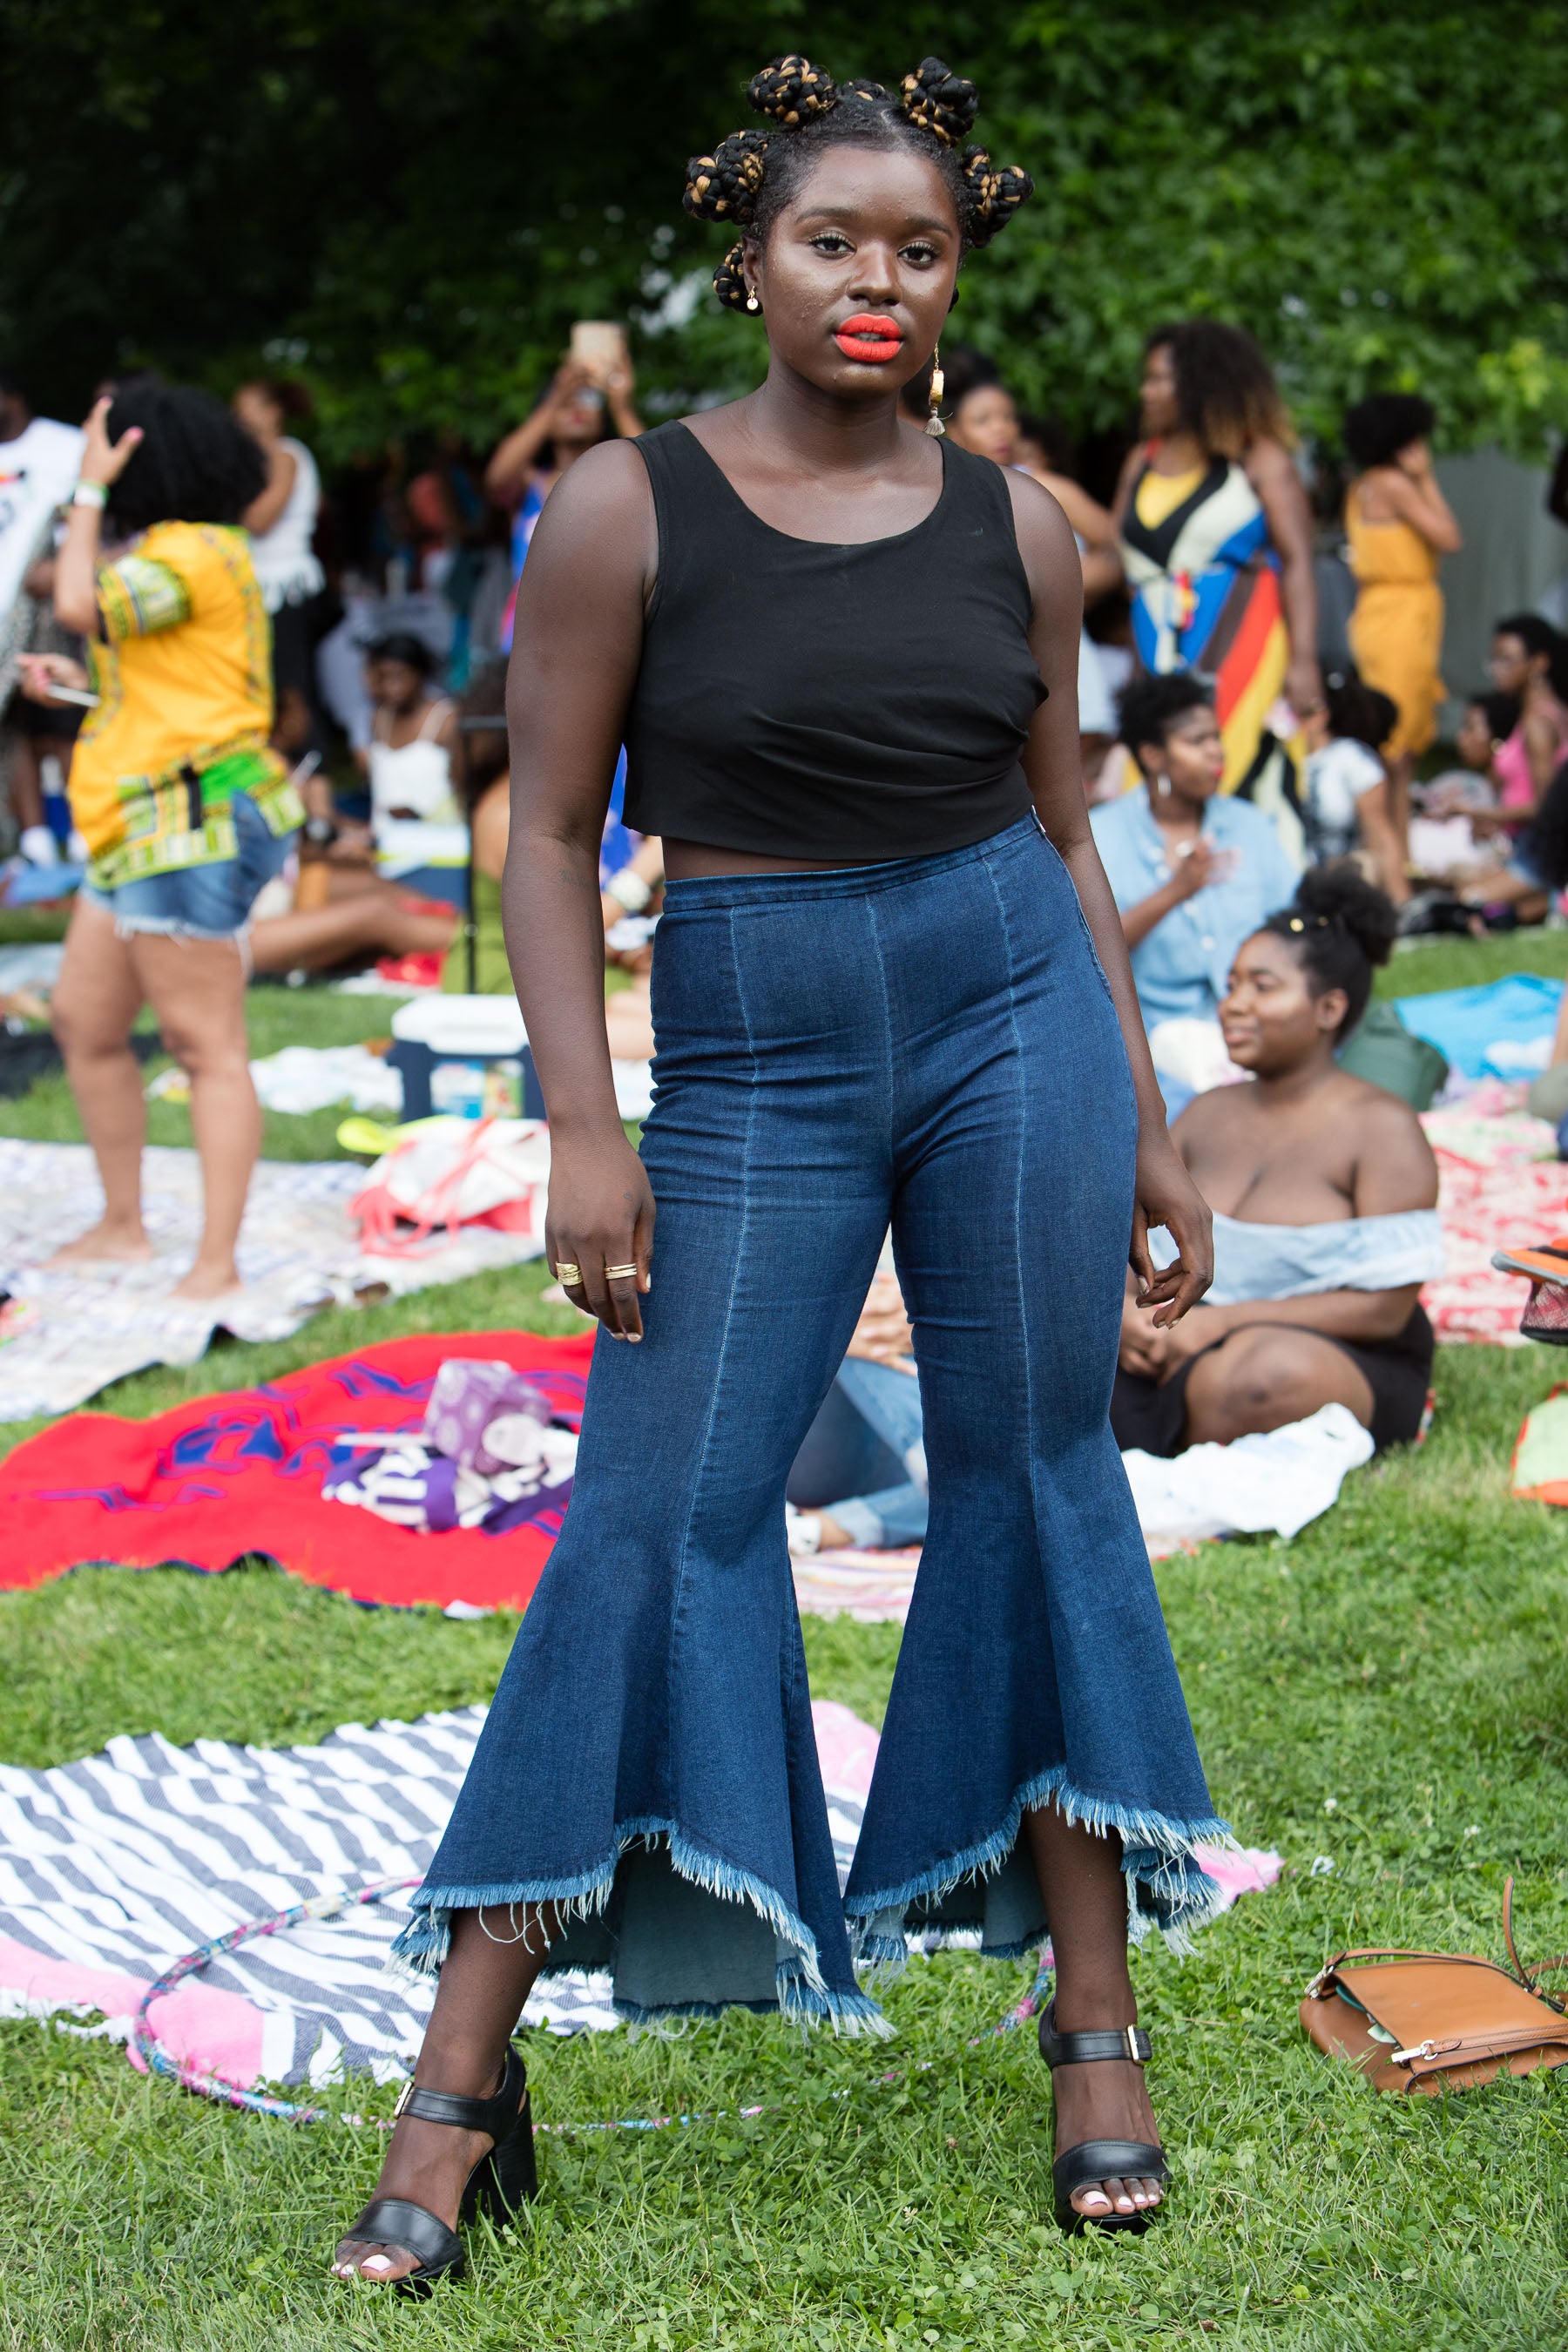 These Natural Beauties Delivered Stunning Style at the 2017 CurlFest
